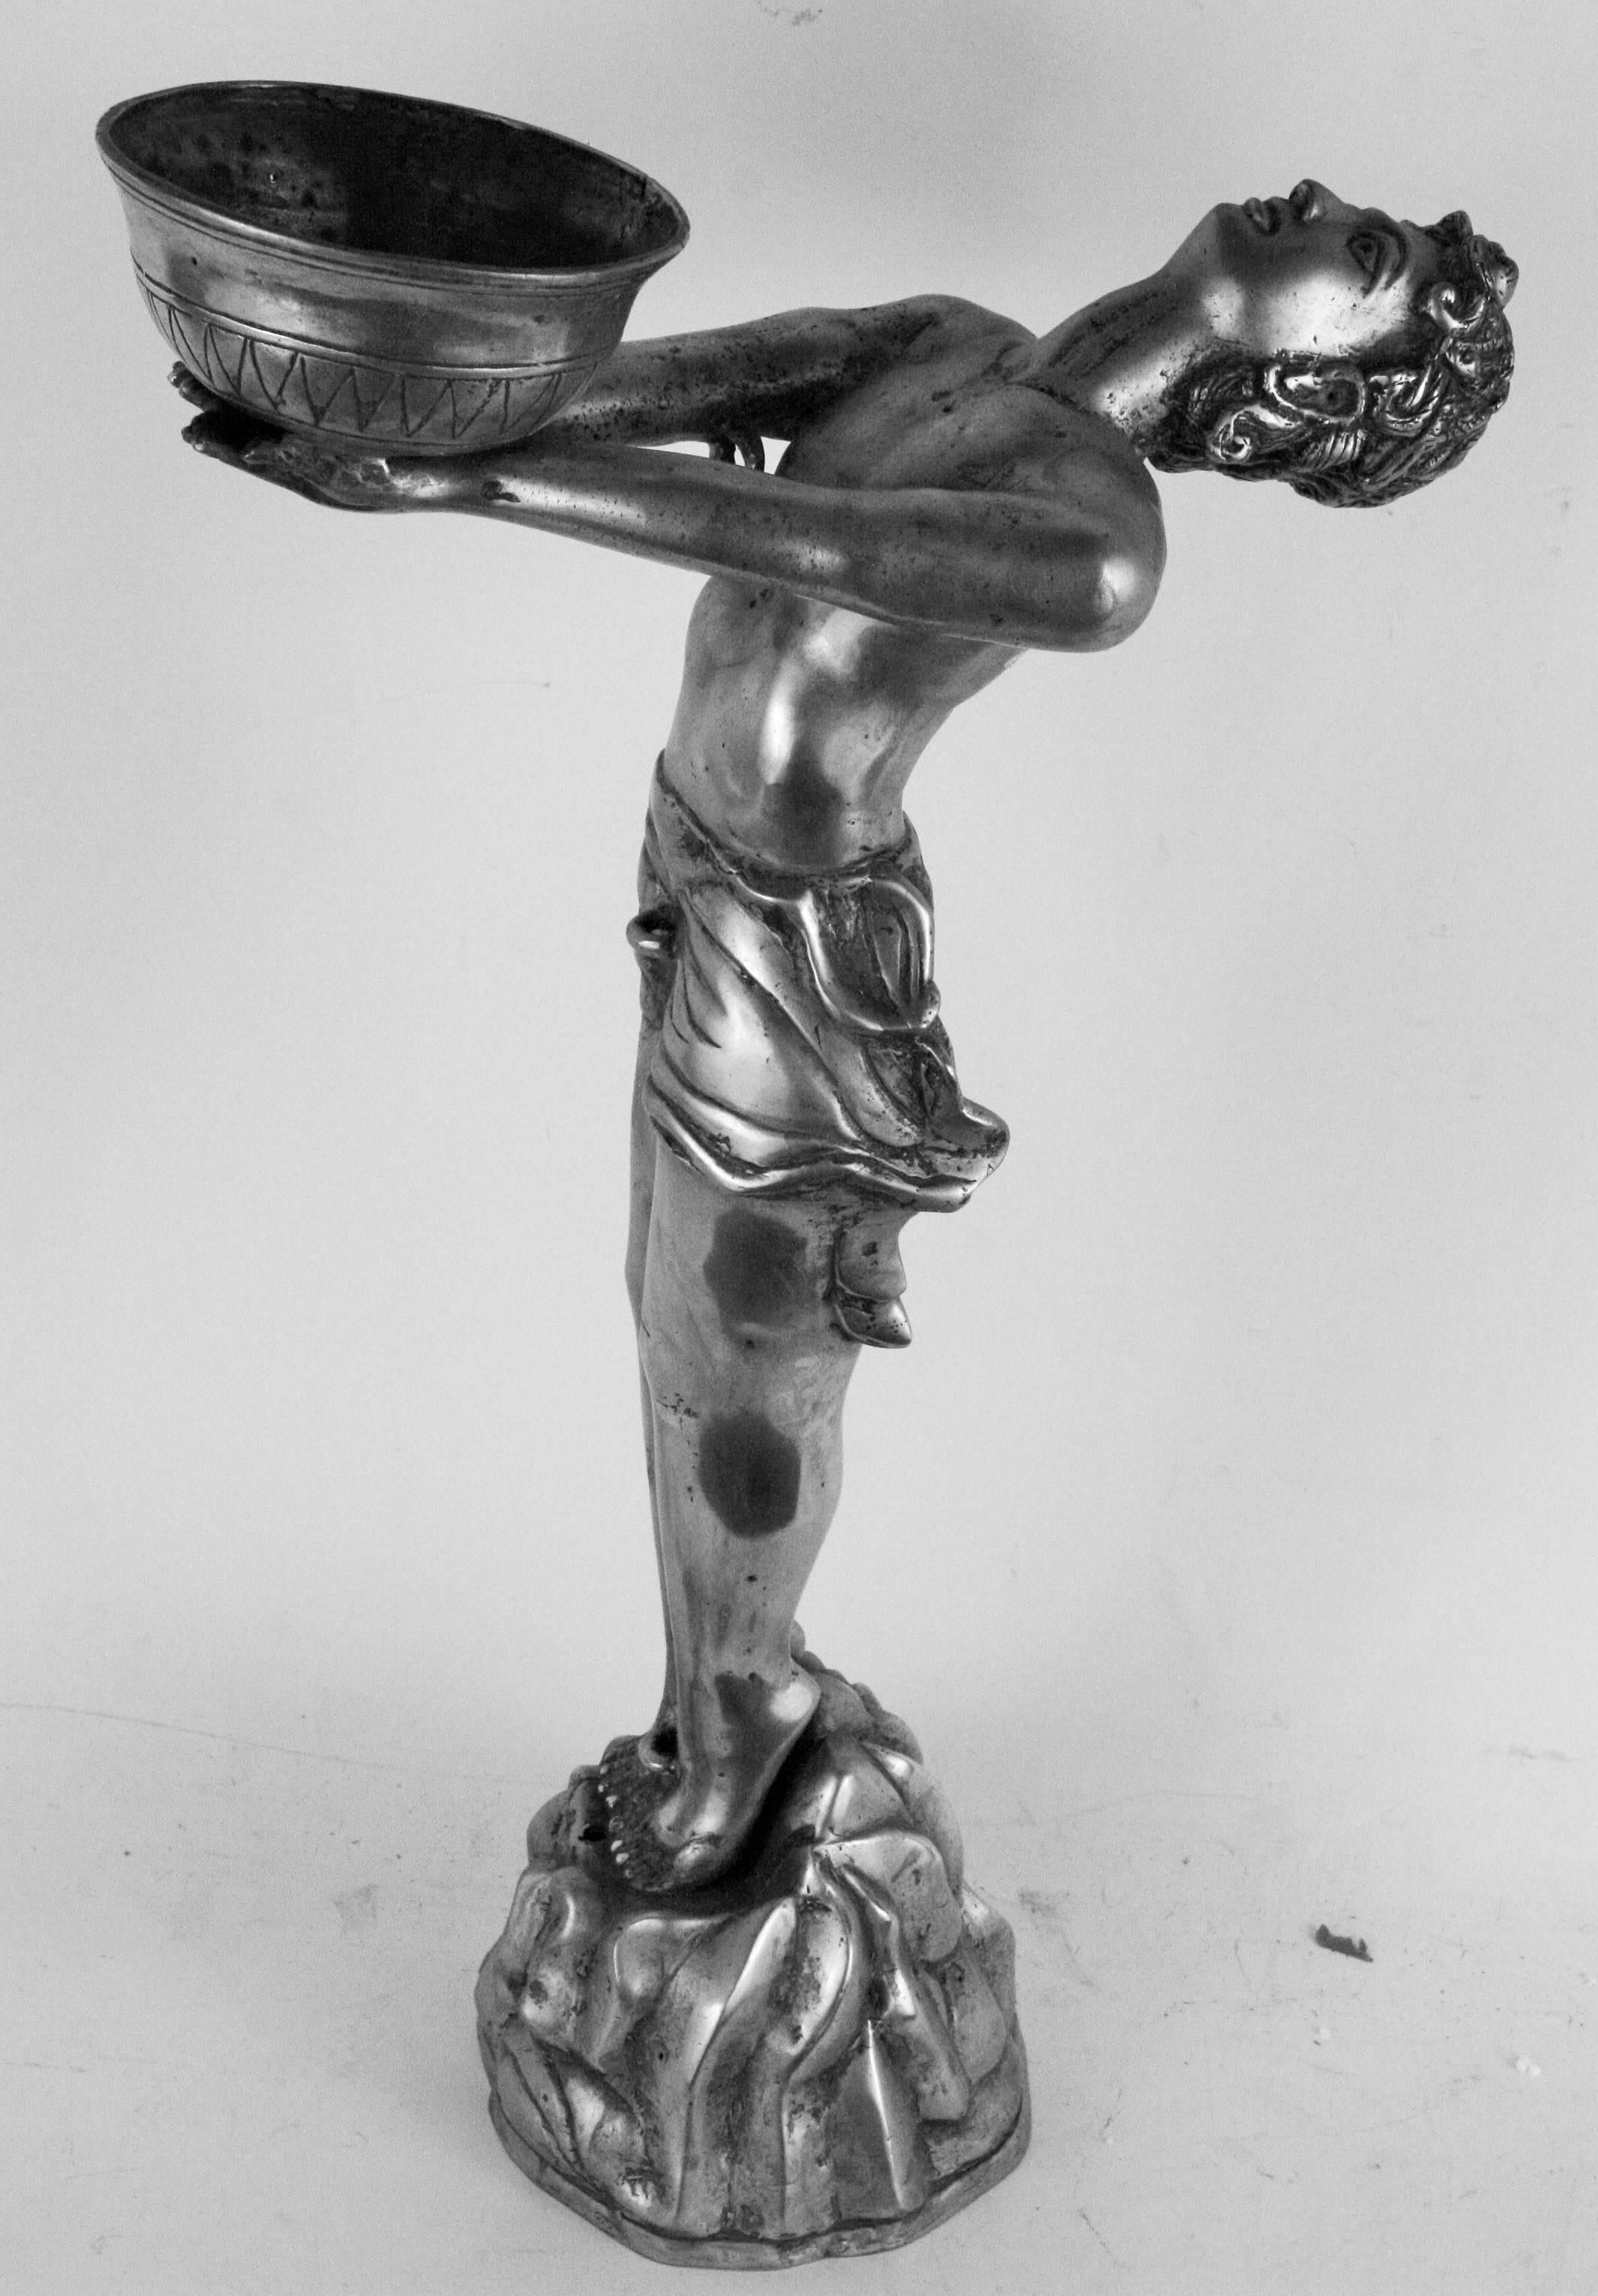 1-4136 Vintage silver plated brass figural Art Deco style sculpture holding a saucer no maker's mark.